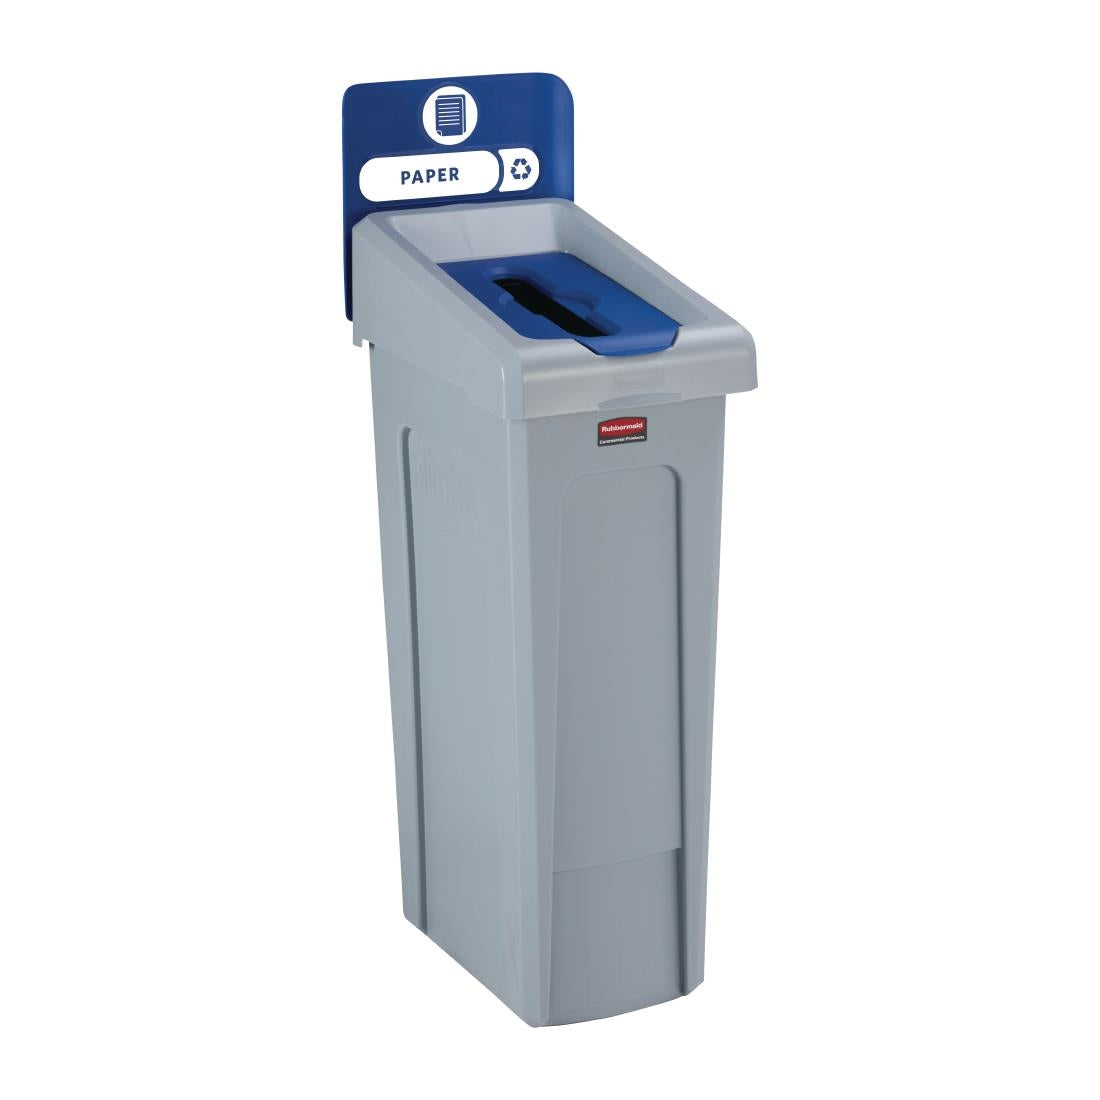 DY087 Rubbermaid Slim Jim Paper Recycling Station Blue 87Ltr